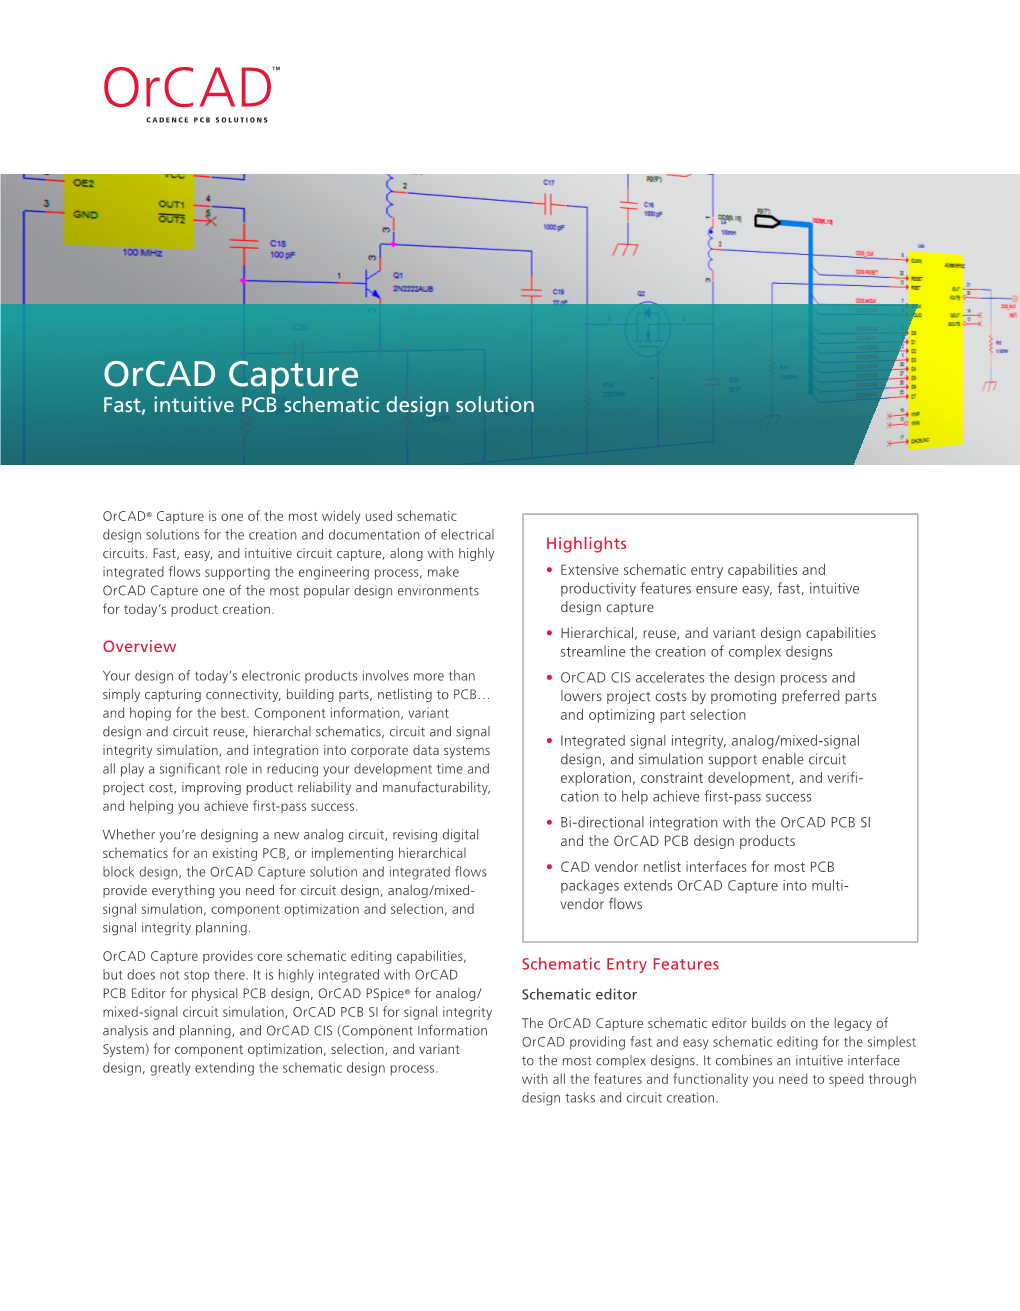 Orcad Capture Fast, Intuitive PCB Schematic Design Solution